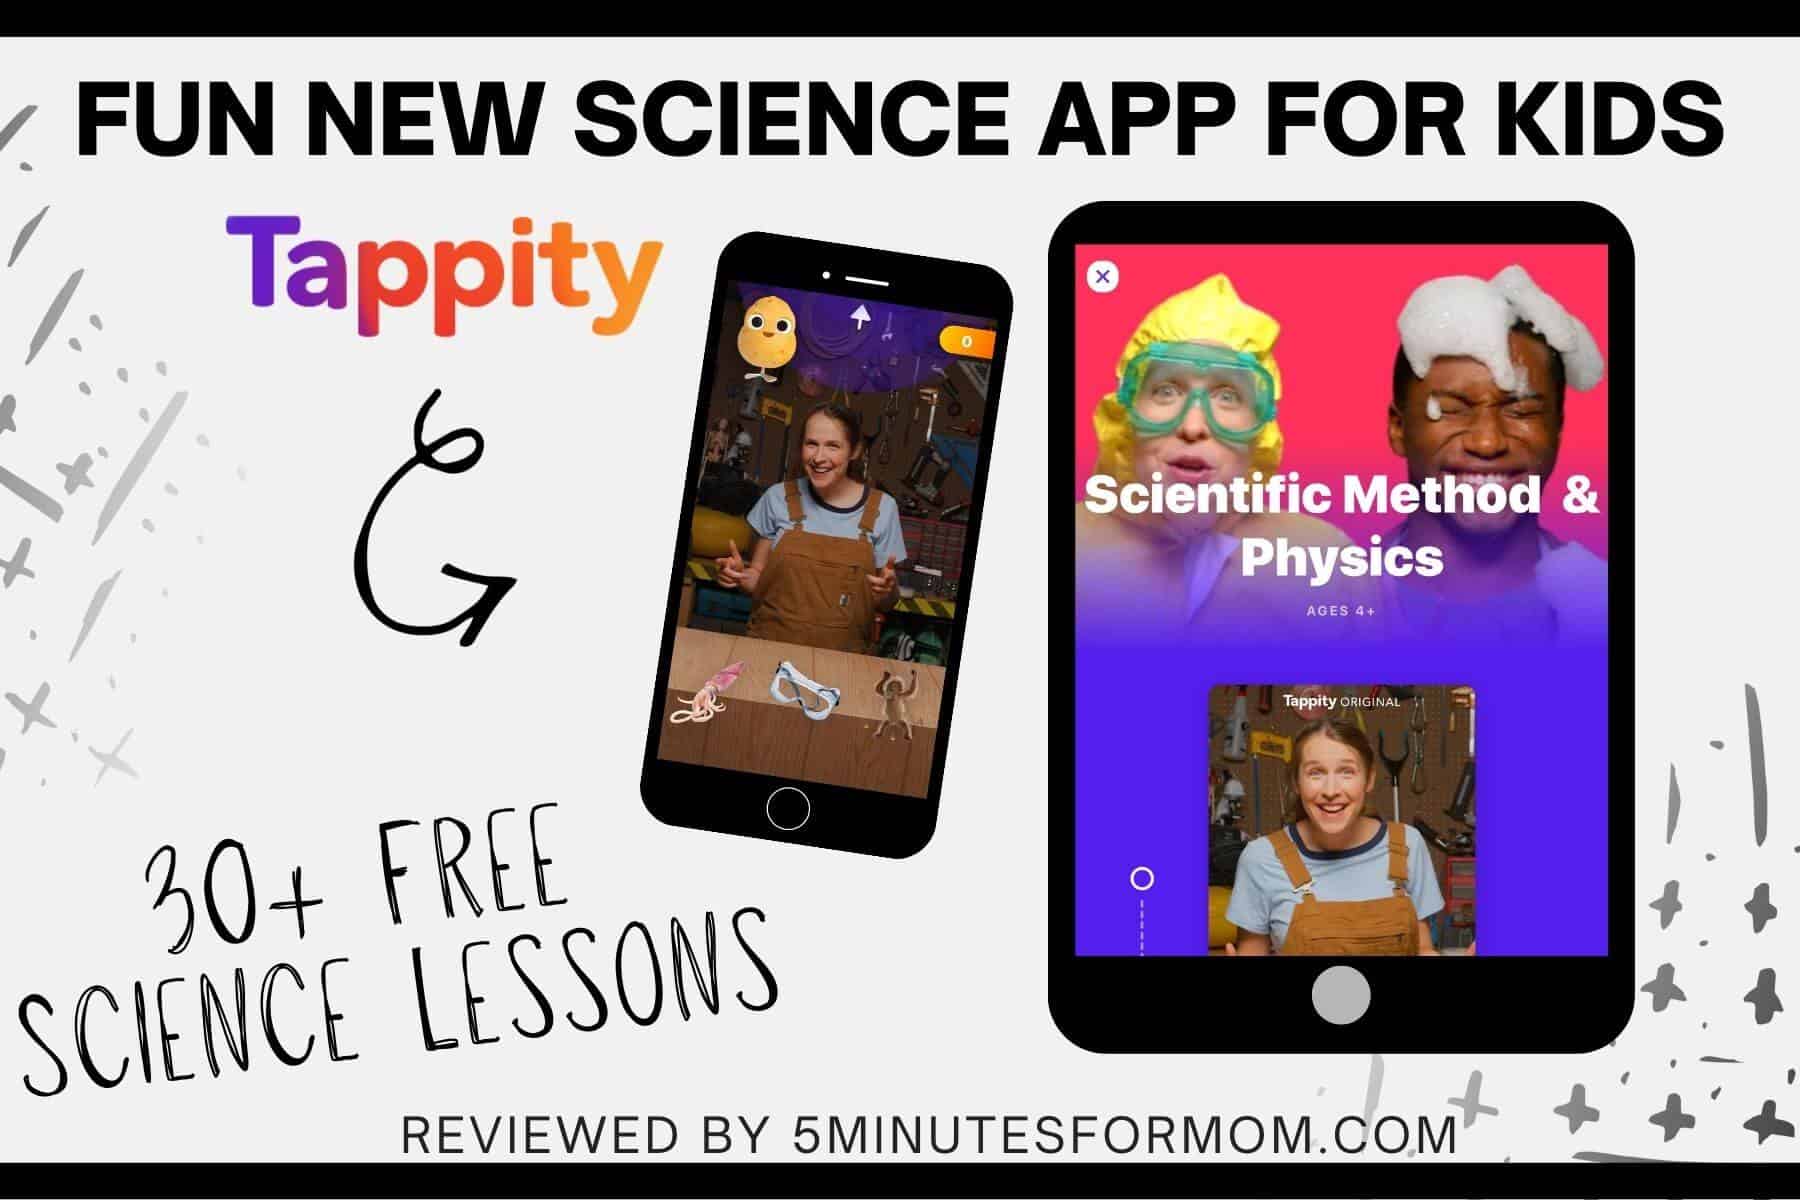 Tappity App Review - Fun Educational Science App for Kids